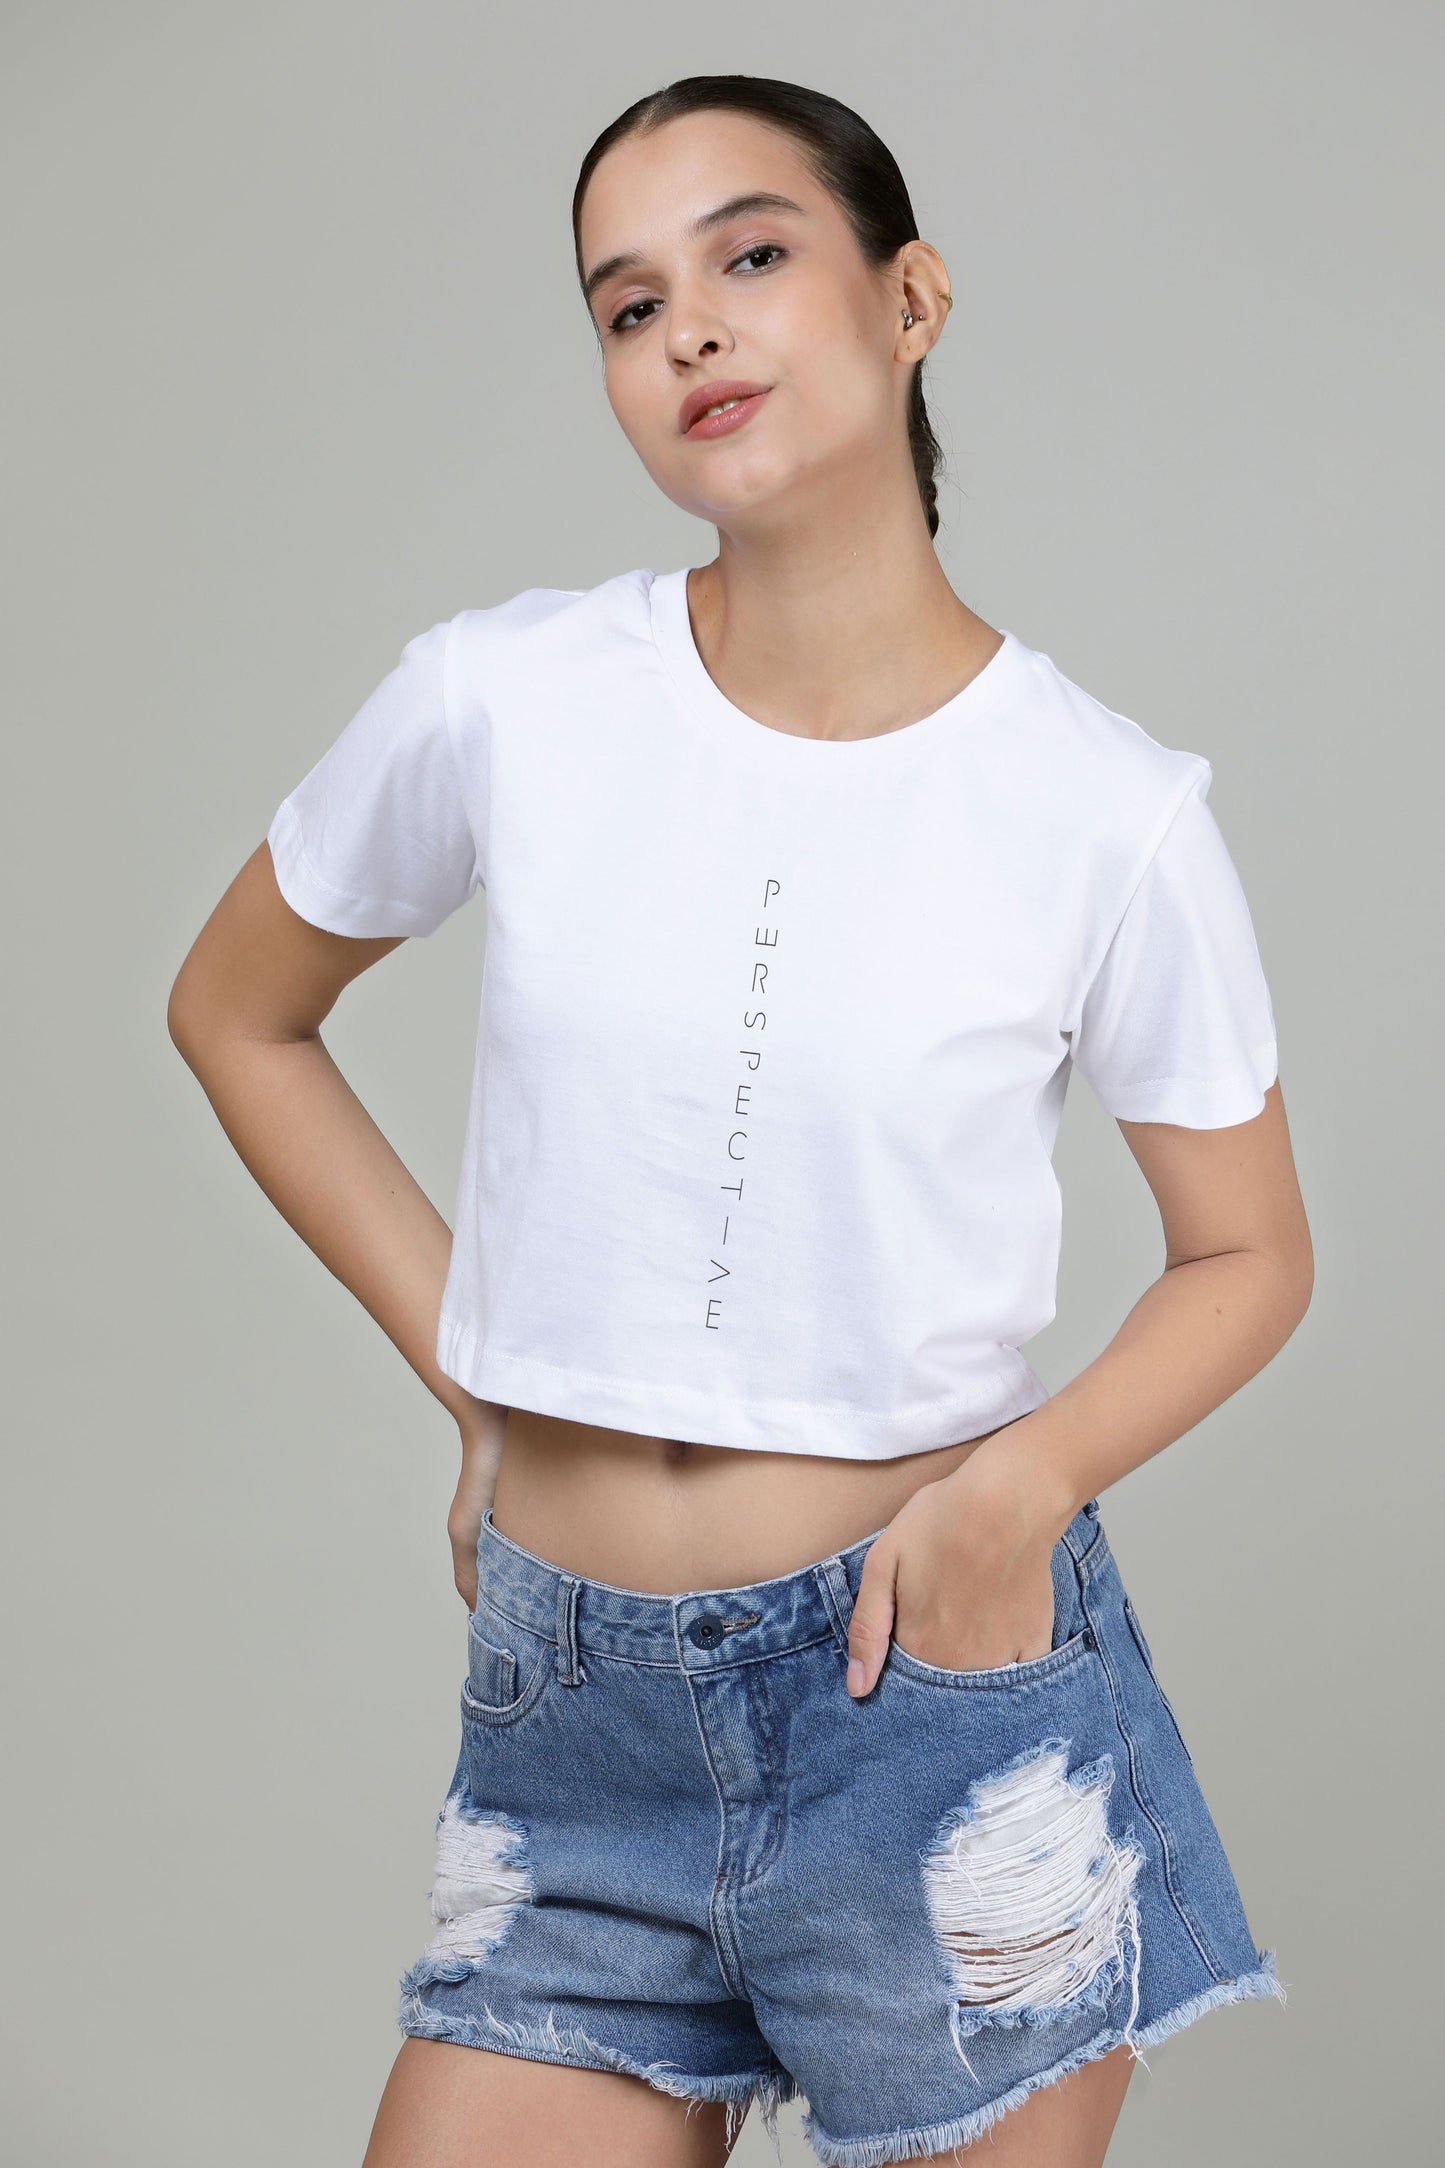 Perspective Radiant White - Printed Crop Top